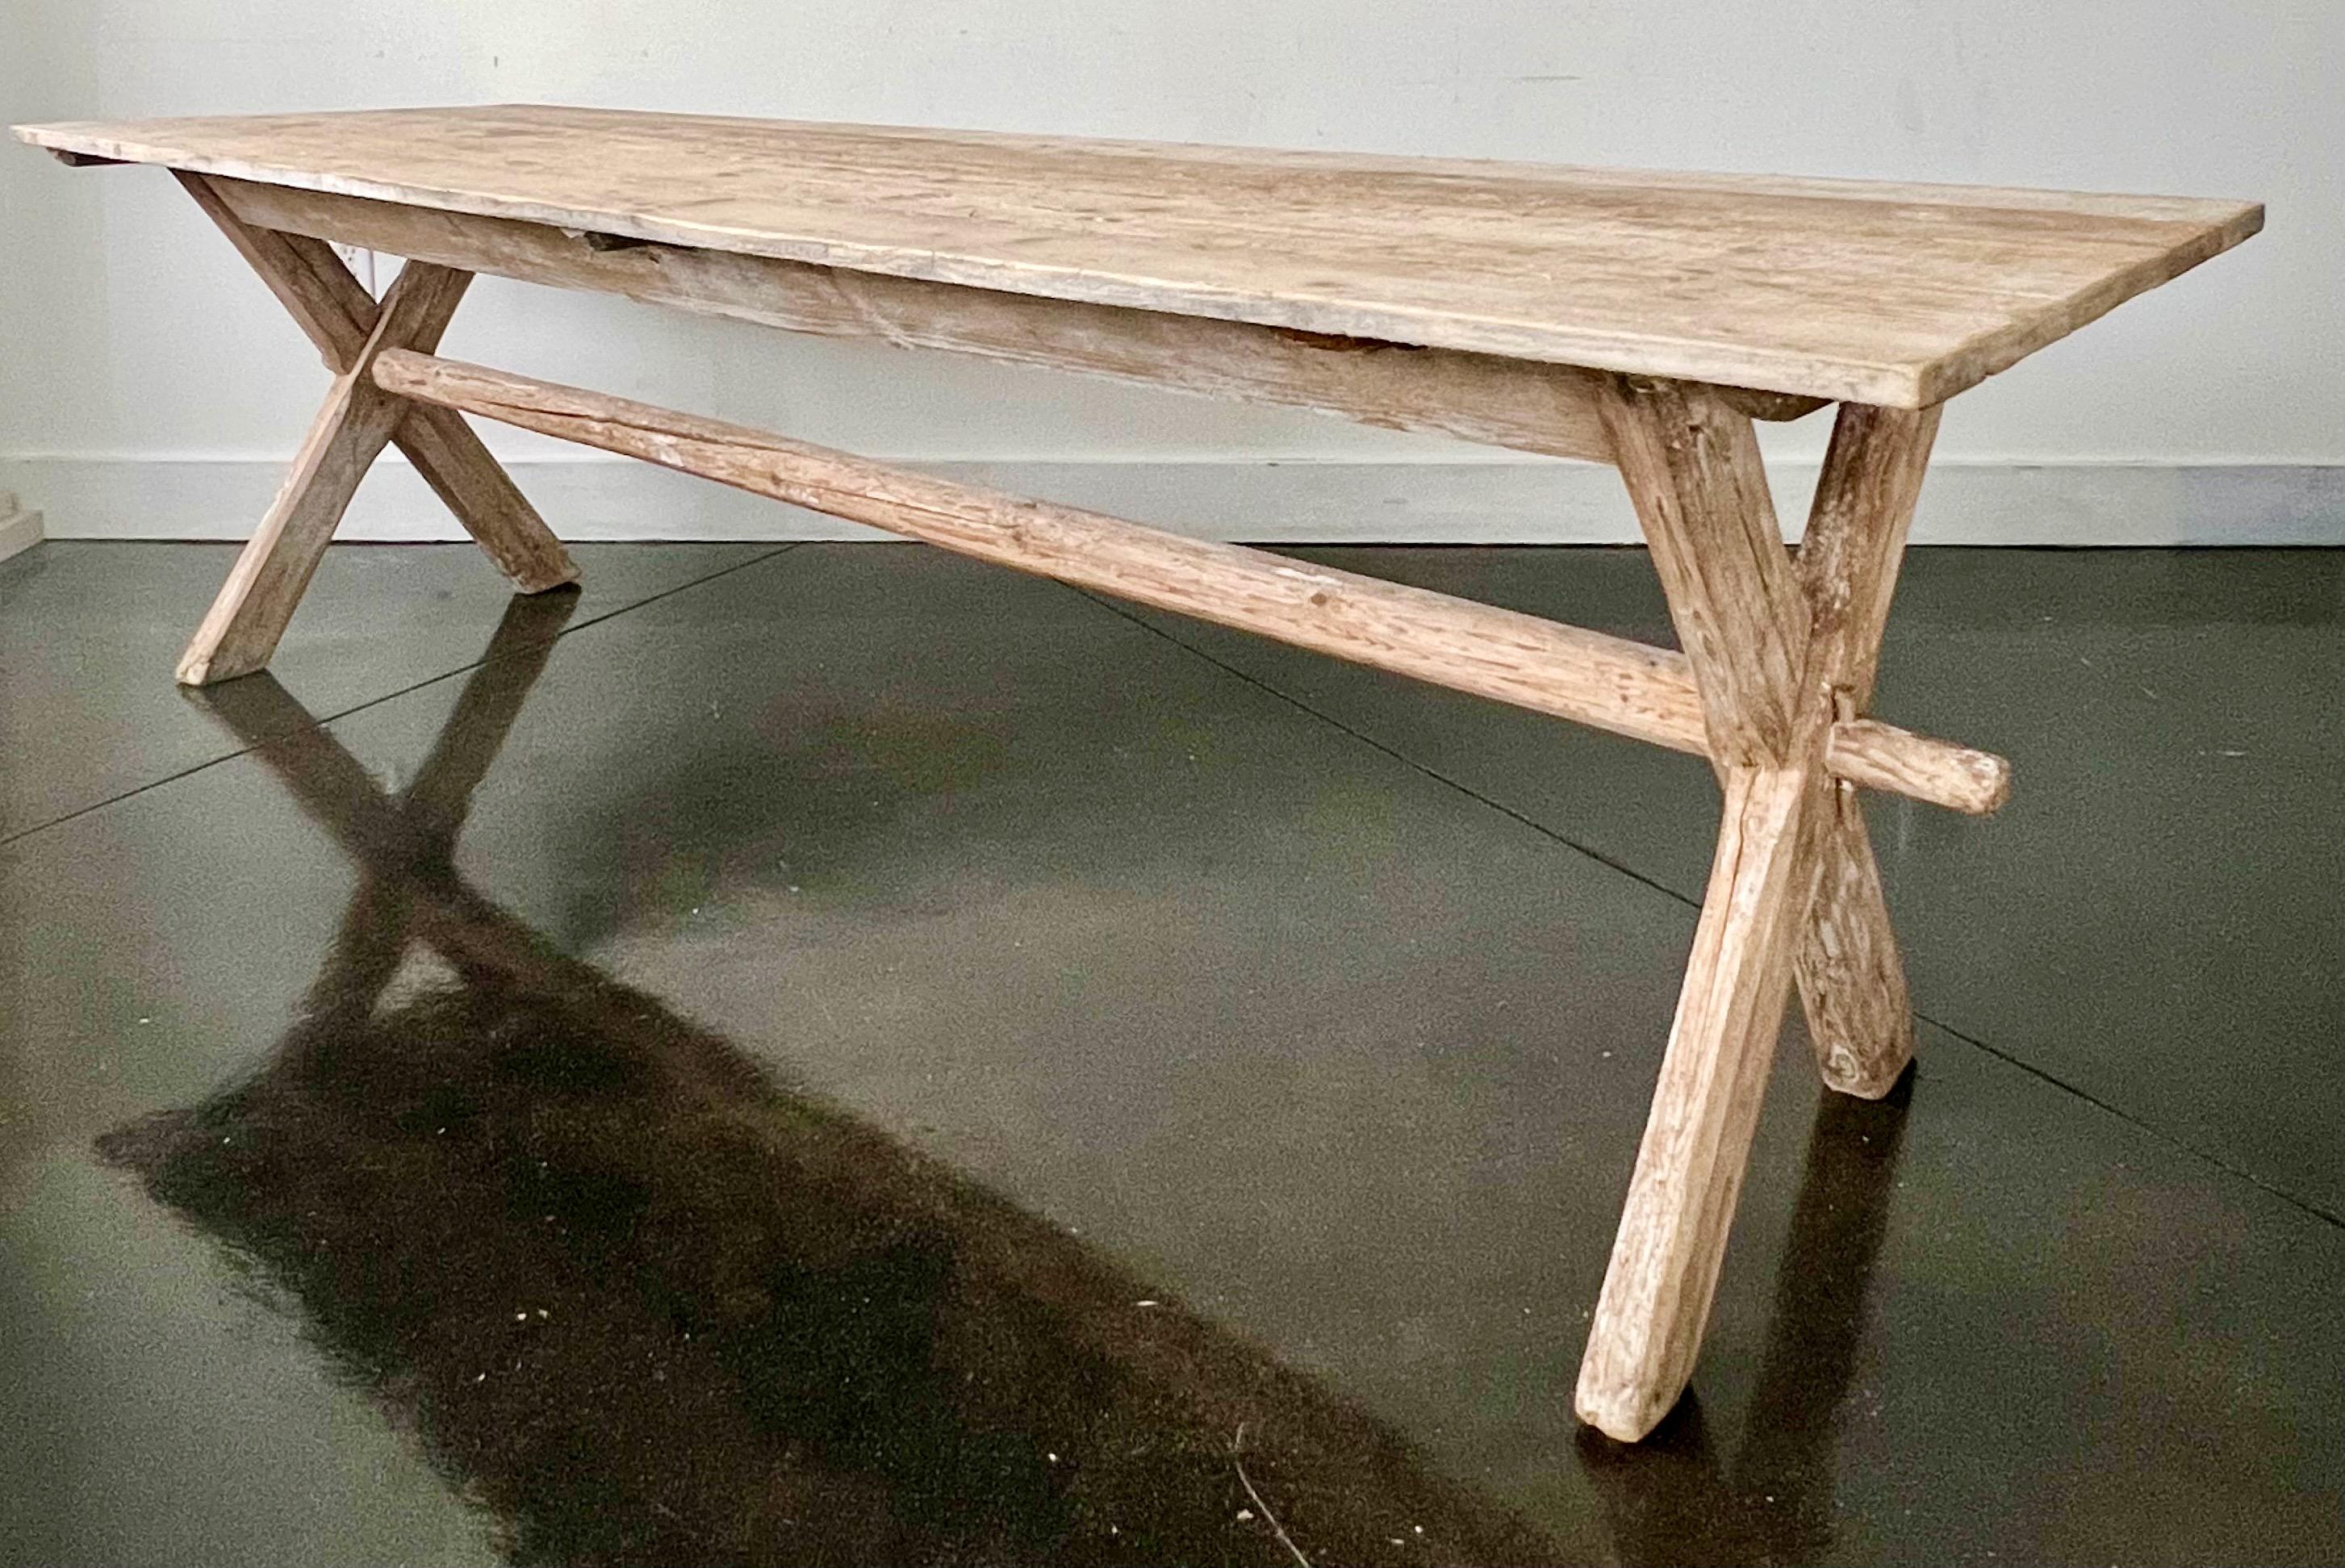 A long 19th century county harvesting table from Alsace, France circa 1840
A rustic harvesting table in worn paint patina and natural pine blanks top on x-shaped base held by stretcher and keyed through-tenons. 
